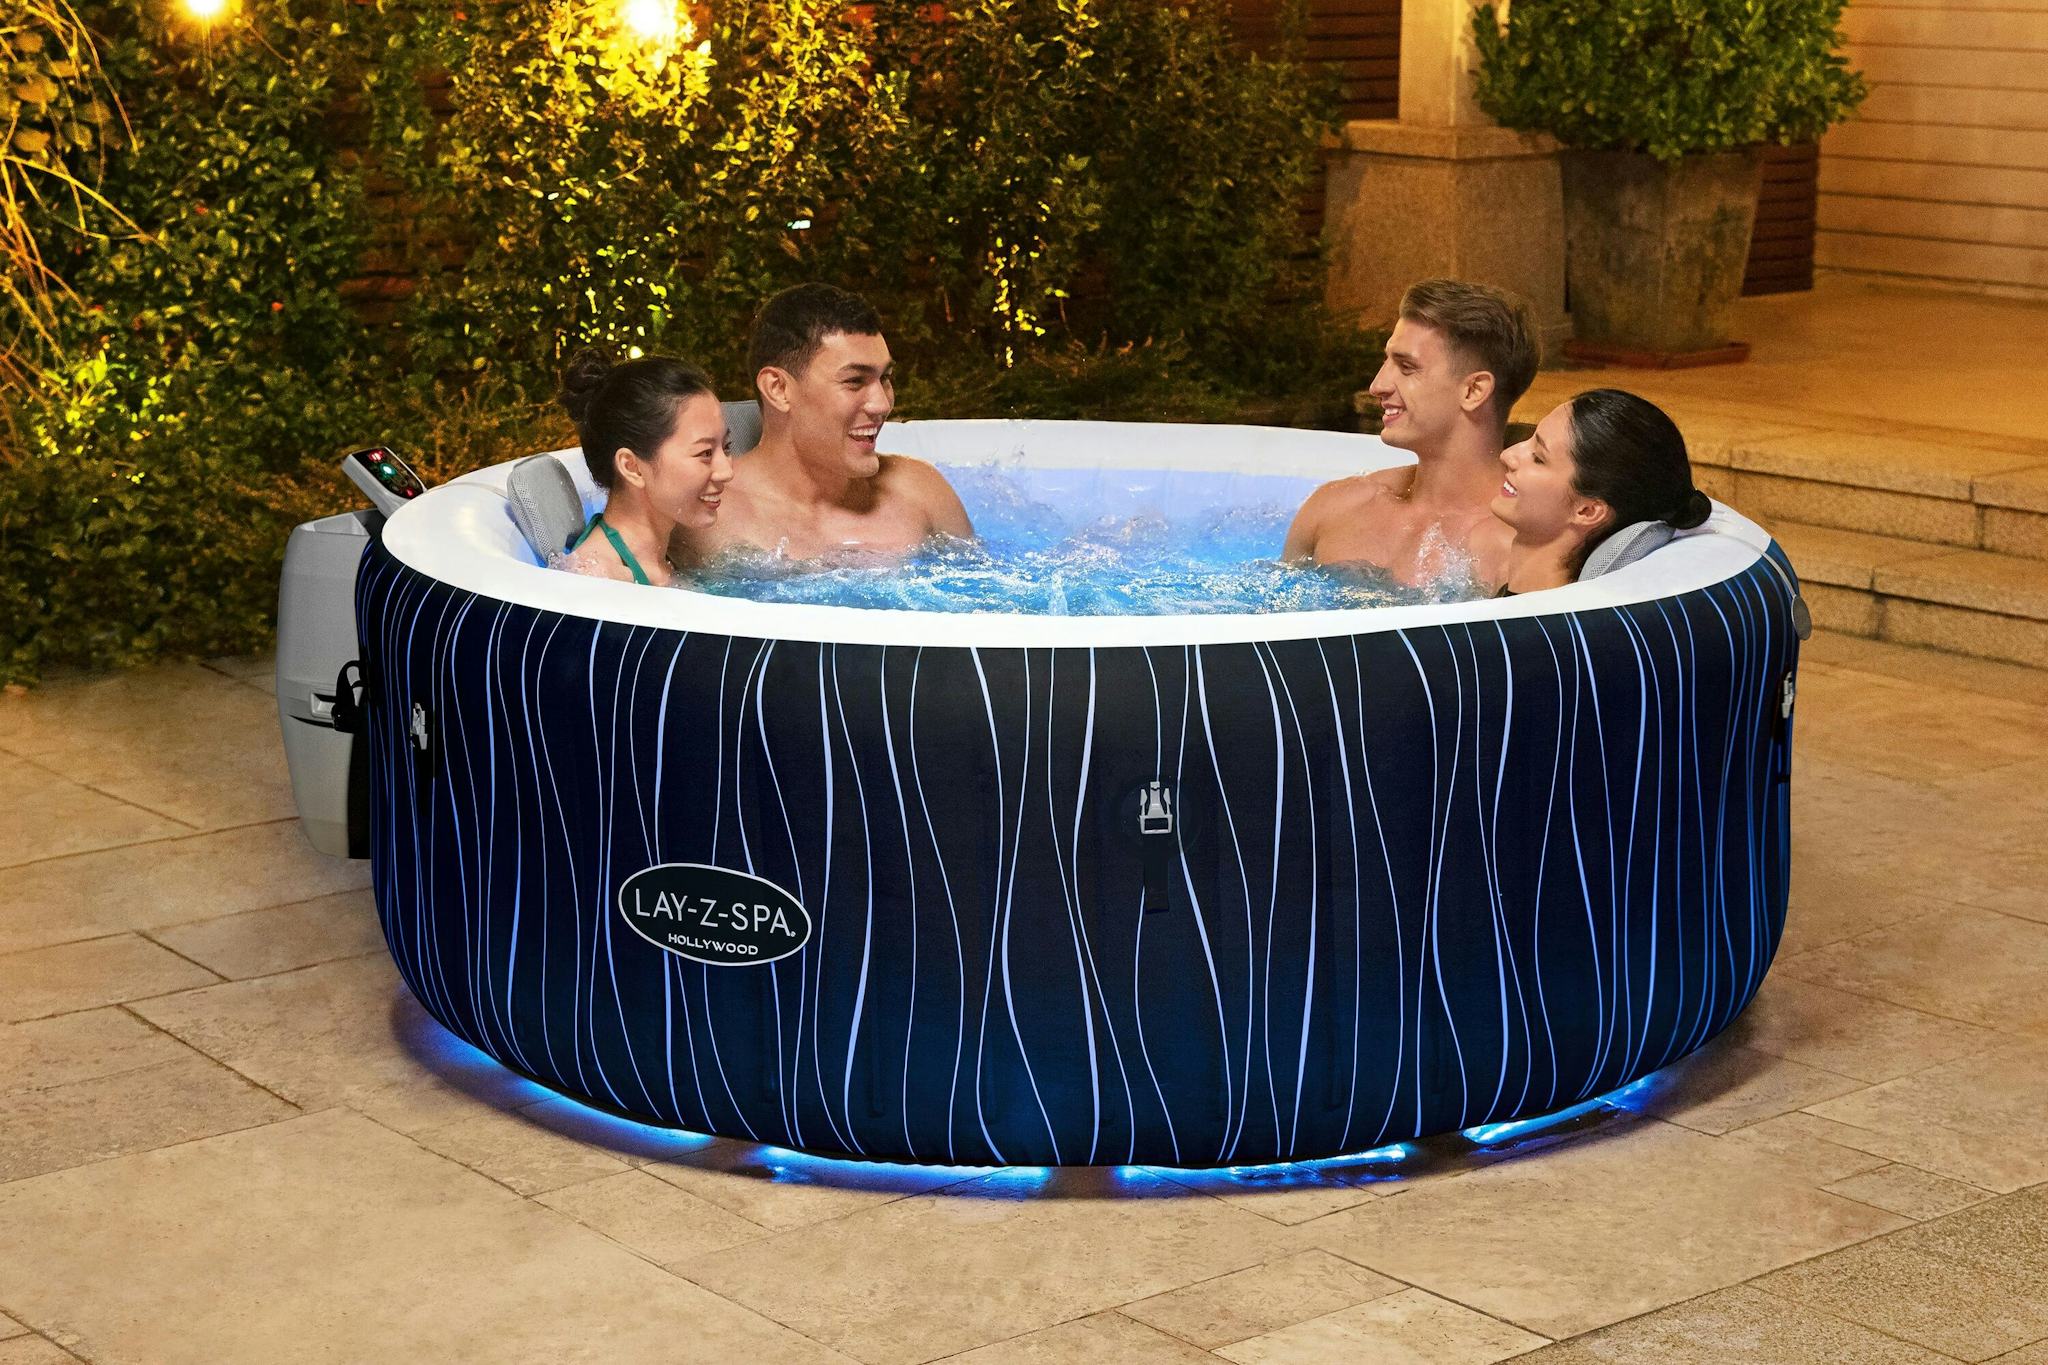 Spas Gonflables Spa gonflable rond Lay-Z-Spa Hollywood Airjet™ 4 - 6 personnes Bestway 2